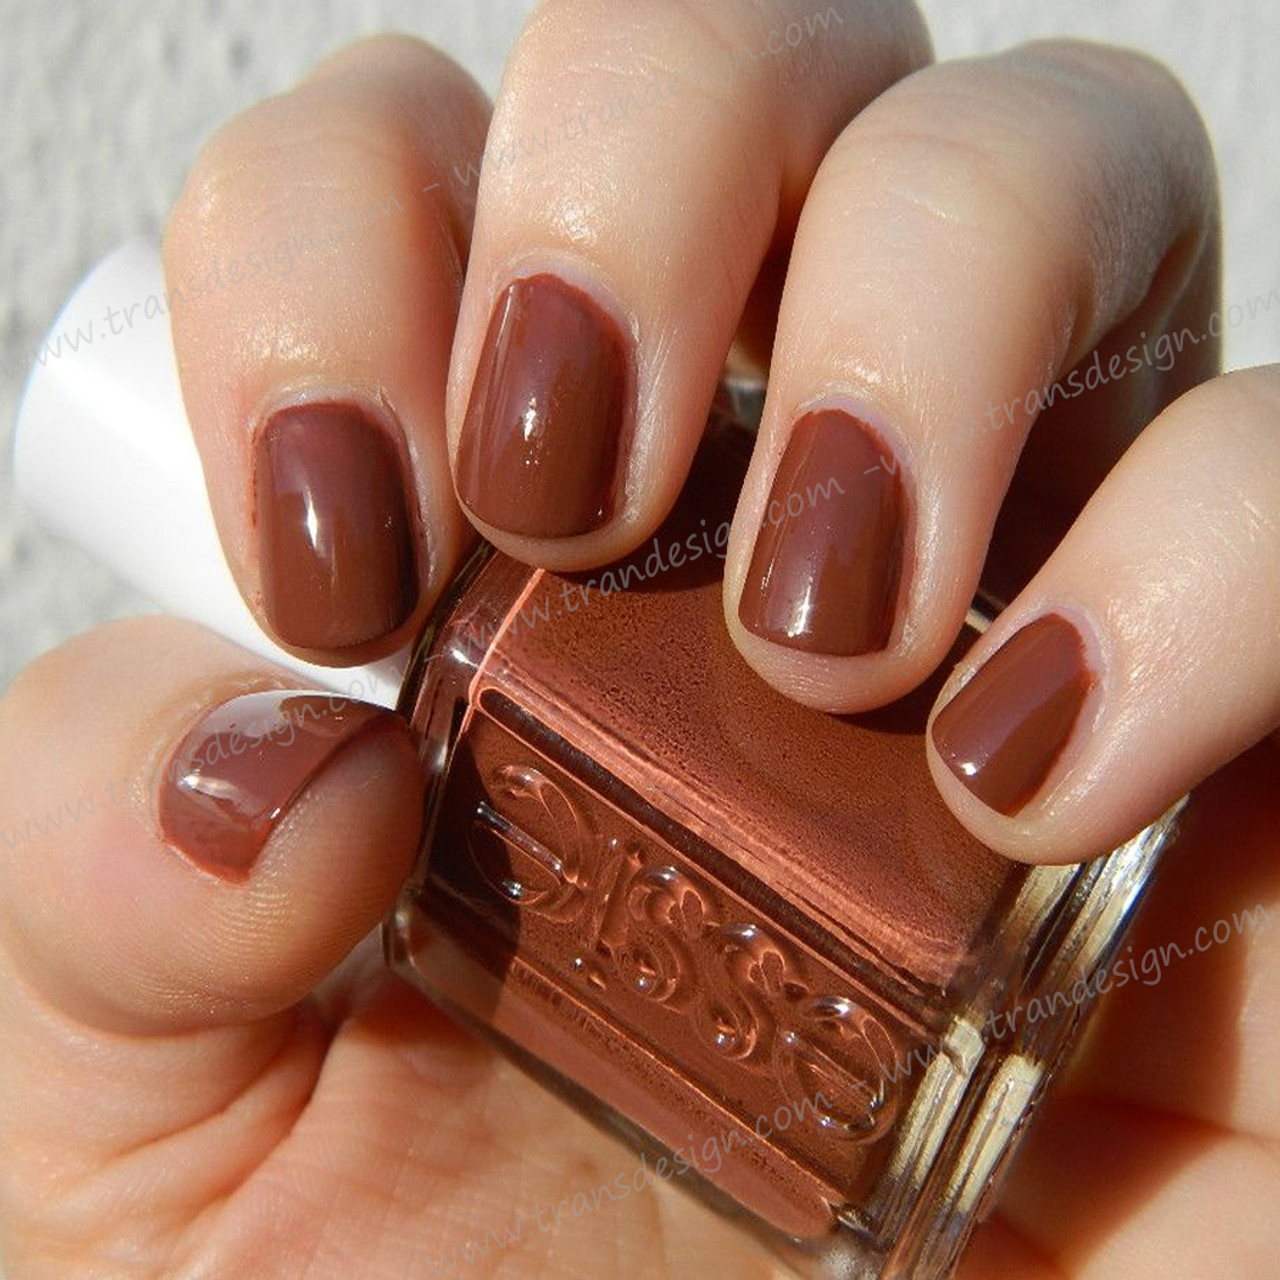 ESSIE GEL COUTURE Patterned & Polished #402 * - TDI, Inc